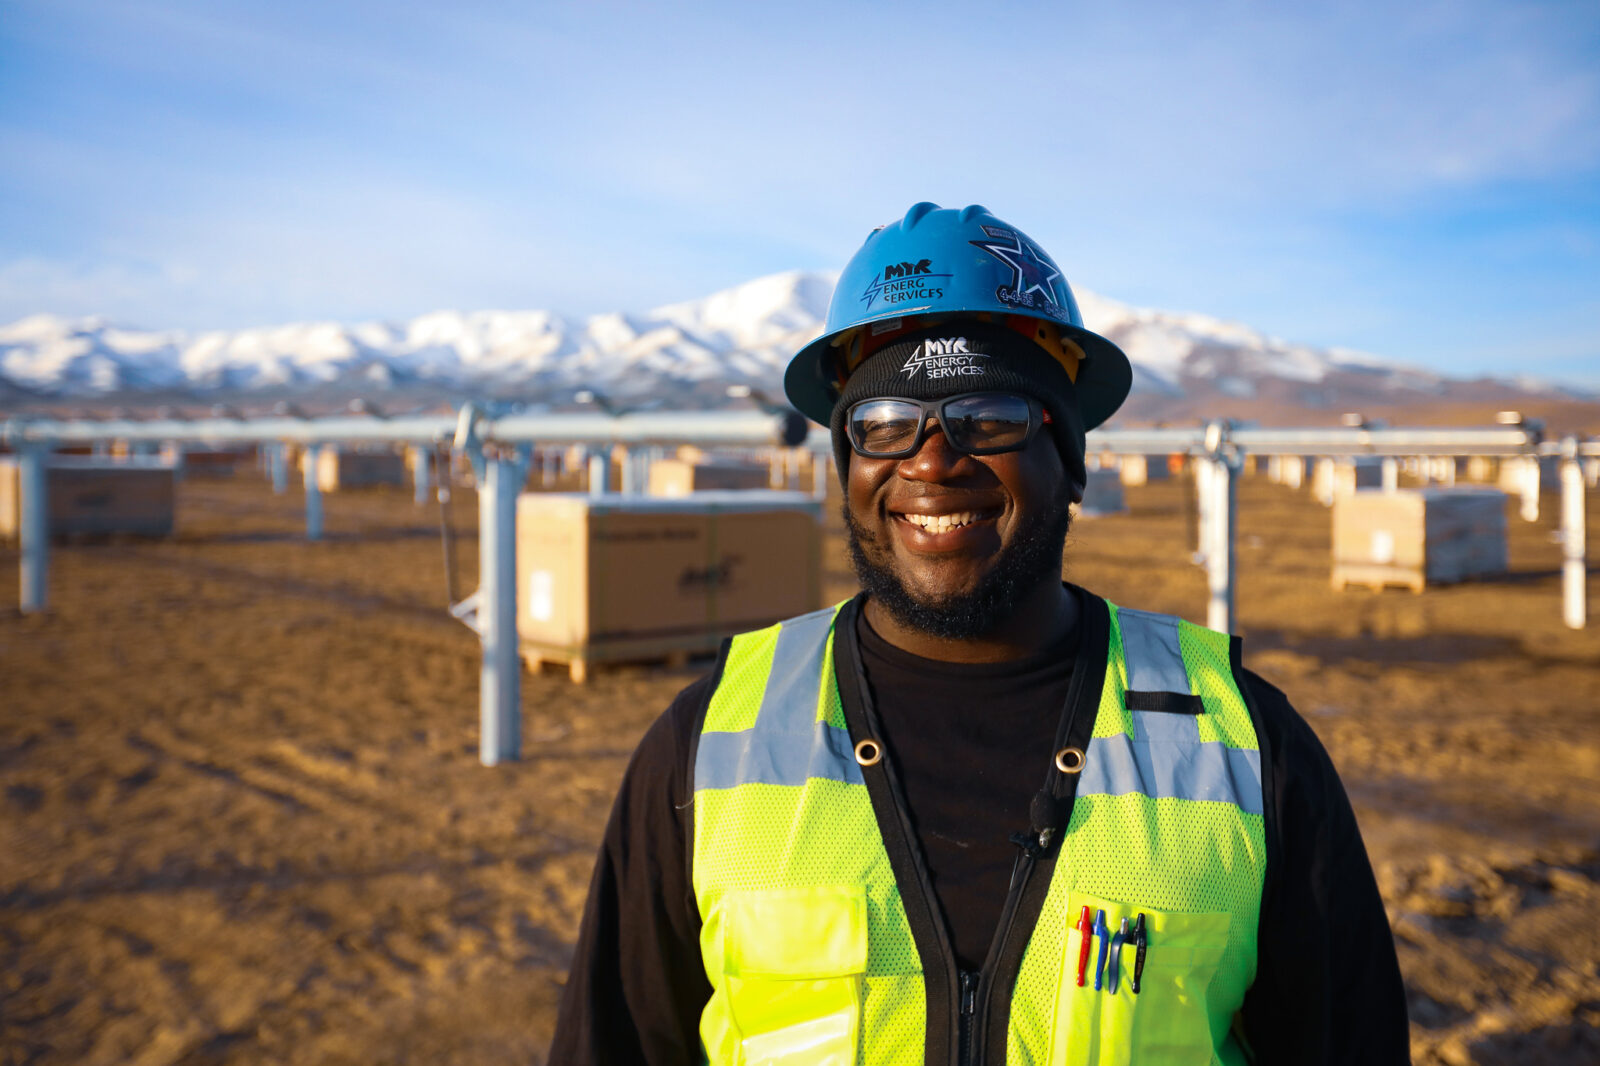 ͵E Energy employee with hard hat and safety glasses smiles for the camera with snowcapped mountains in the distance